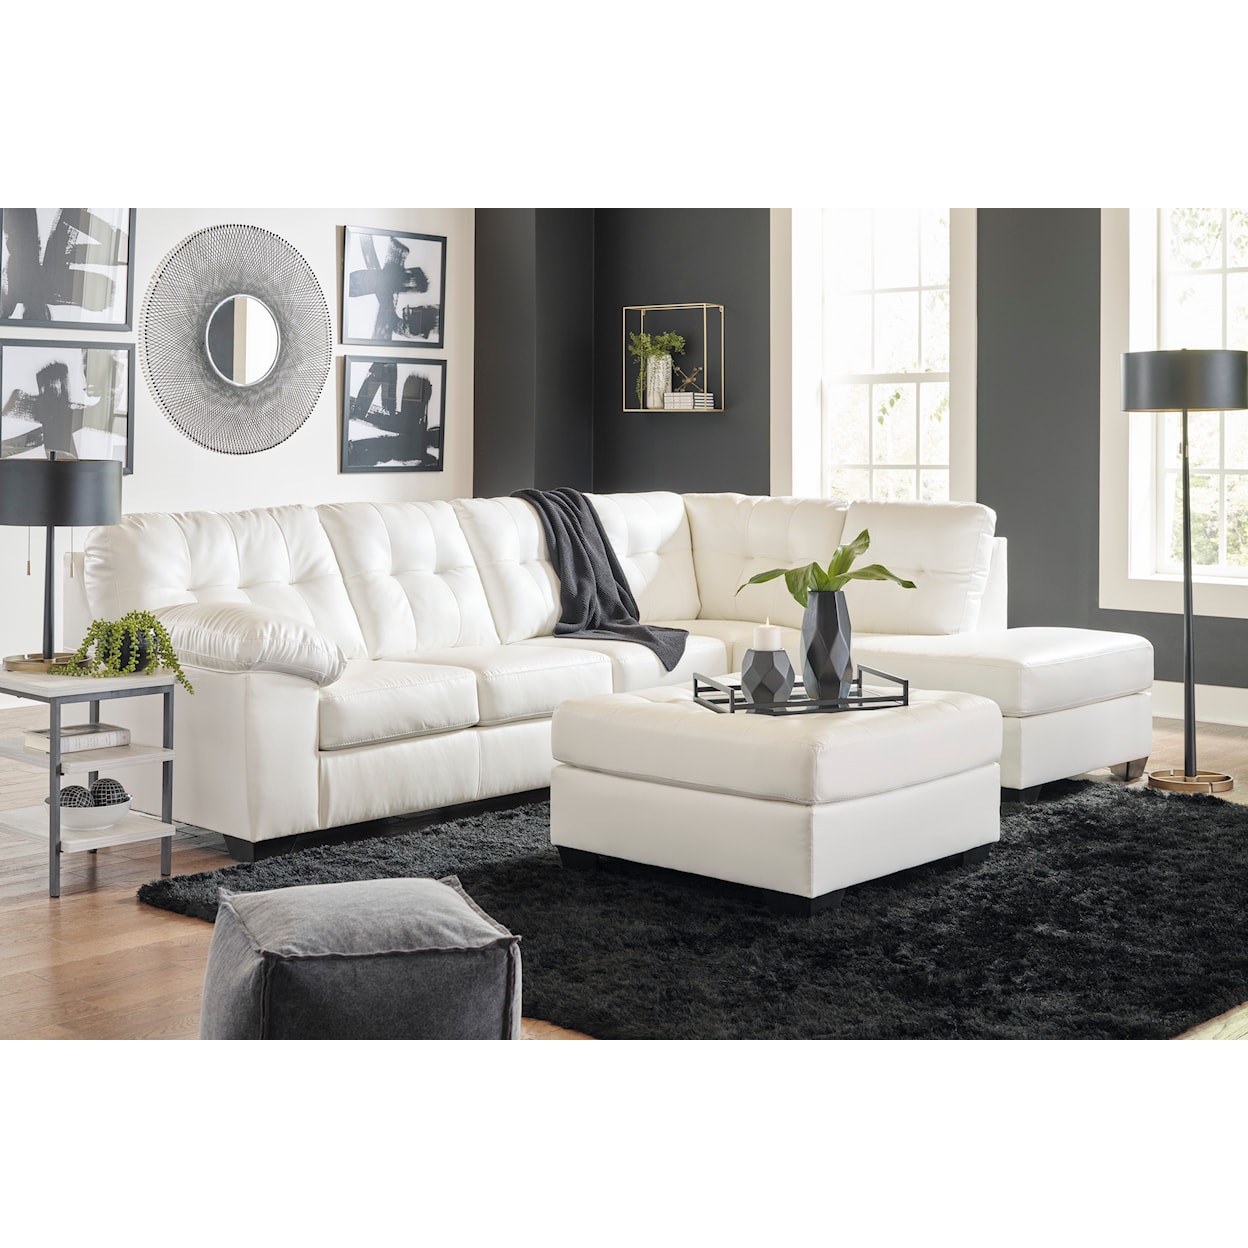 Michael Alan Select Donlen Sectional and Ottoman